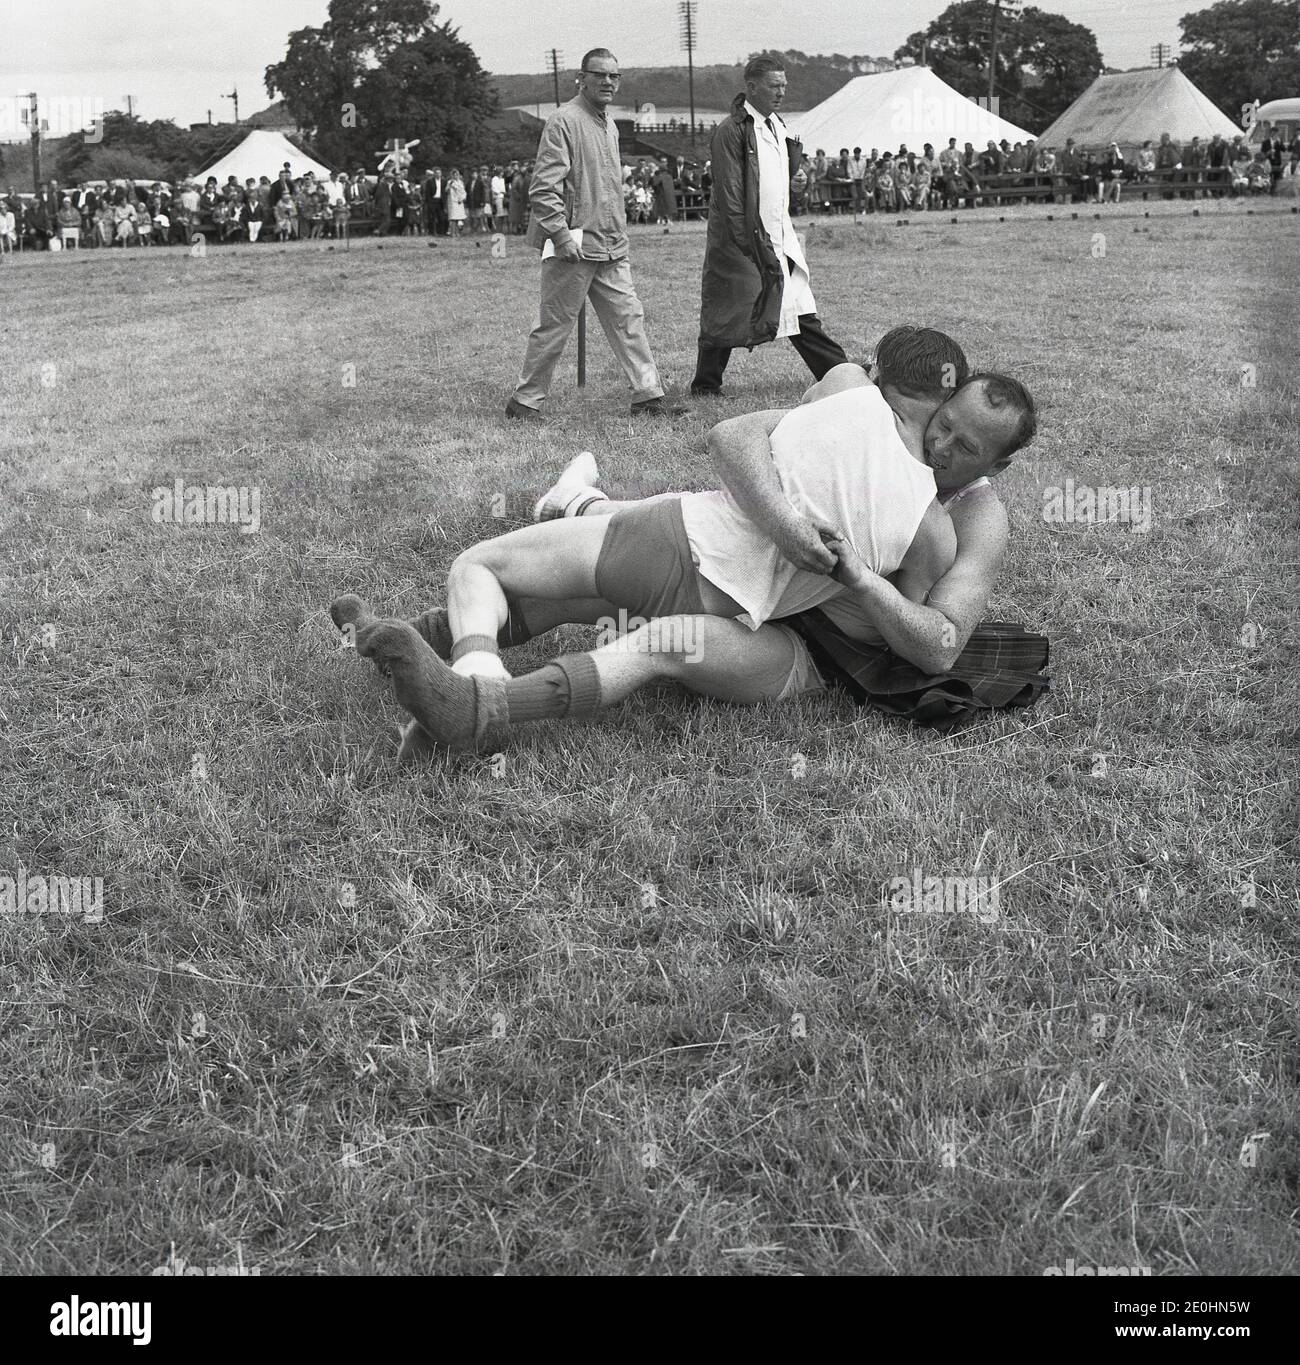 1960s, historical, two men wrestling on the grass at the Highland Games, Scotland, UK, with one man wearing just underpants, while the other has a kilt on. Stock Photo